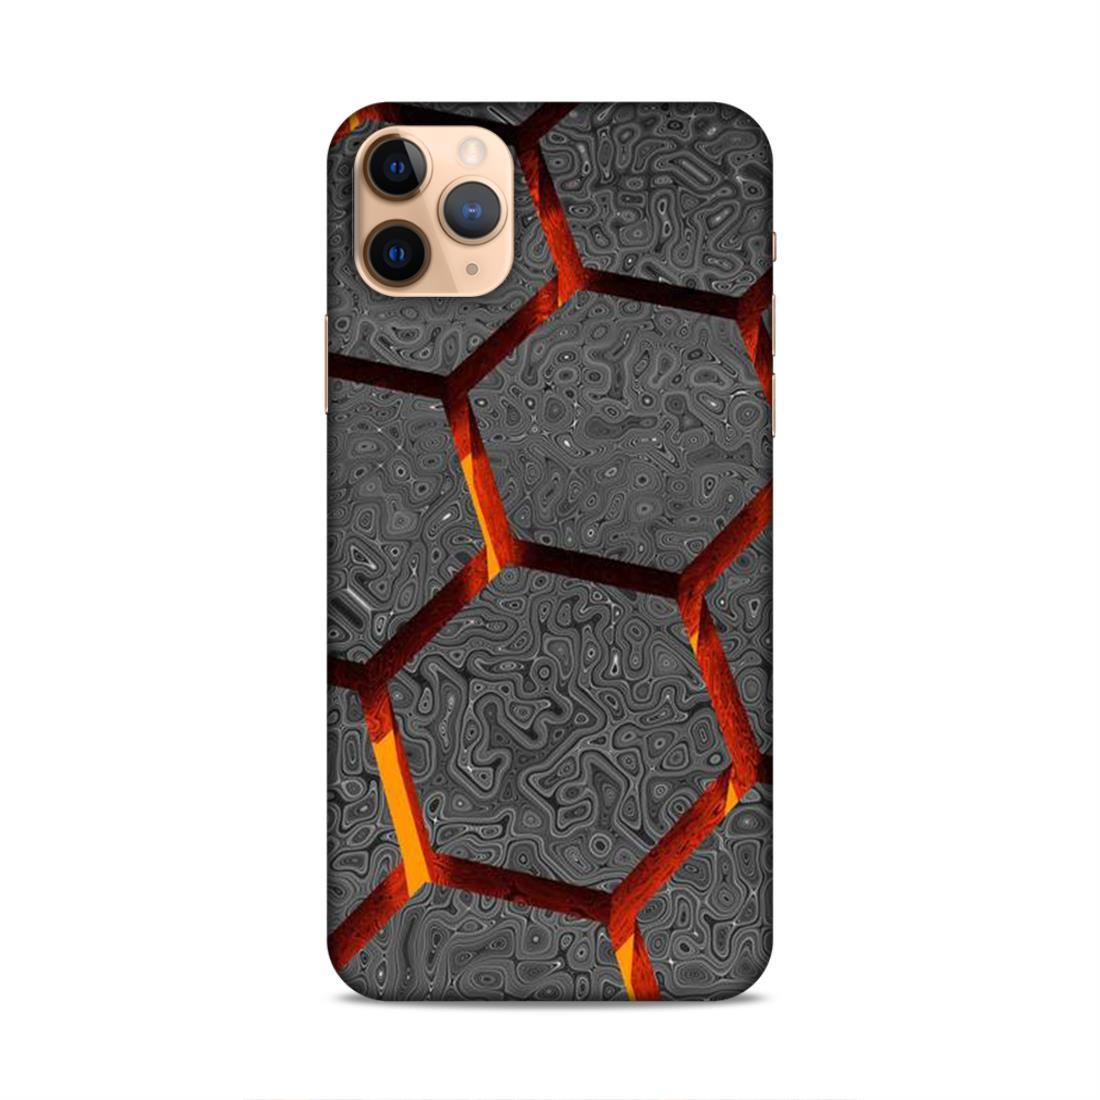 Hexagon Pattern iPhone 11 Pro Phone Case Cover